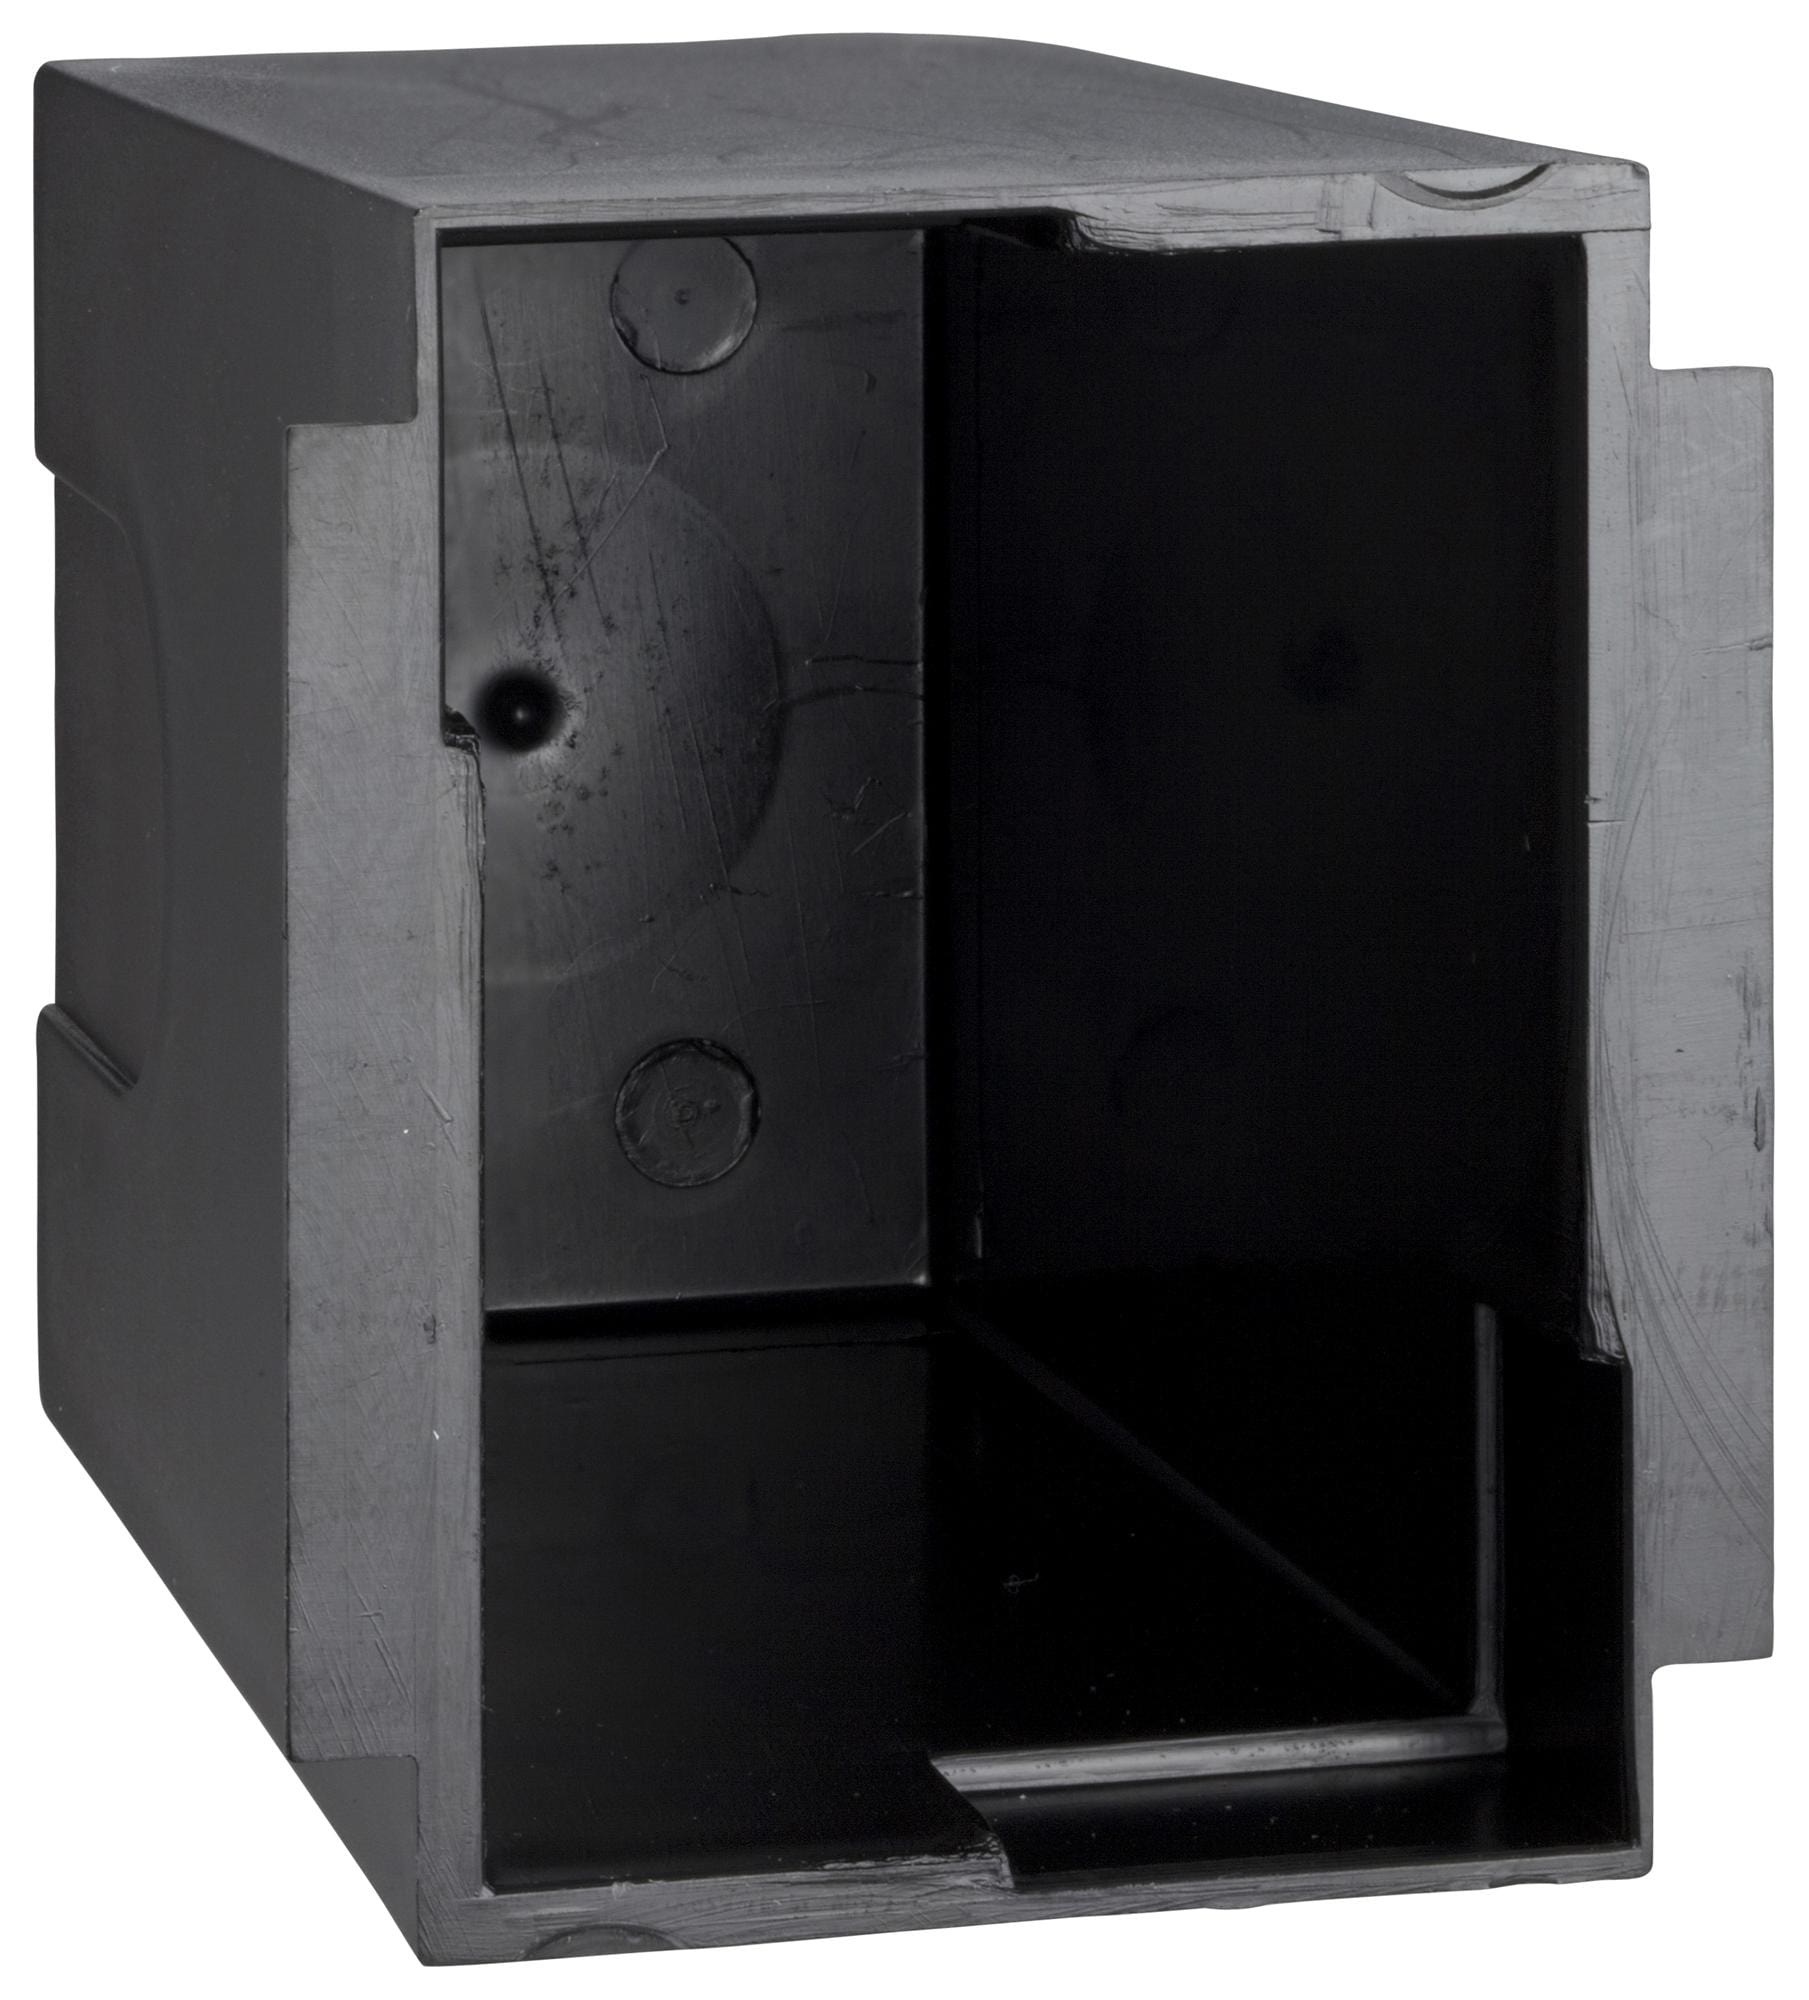 XAPE903 REAR PROTECTIVE COVE SCHNEIDER ELECTRIC